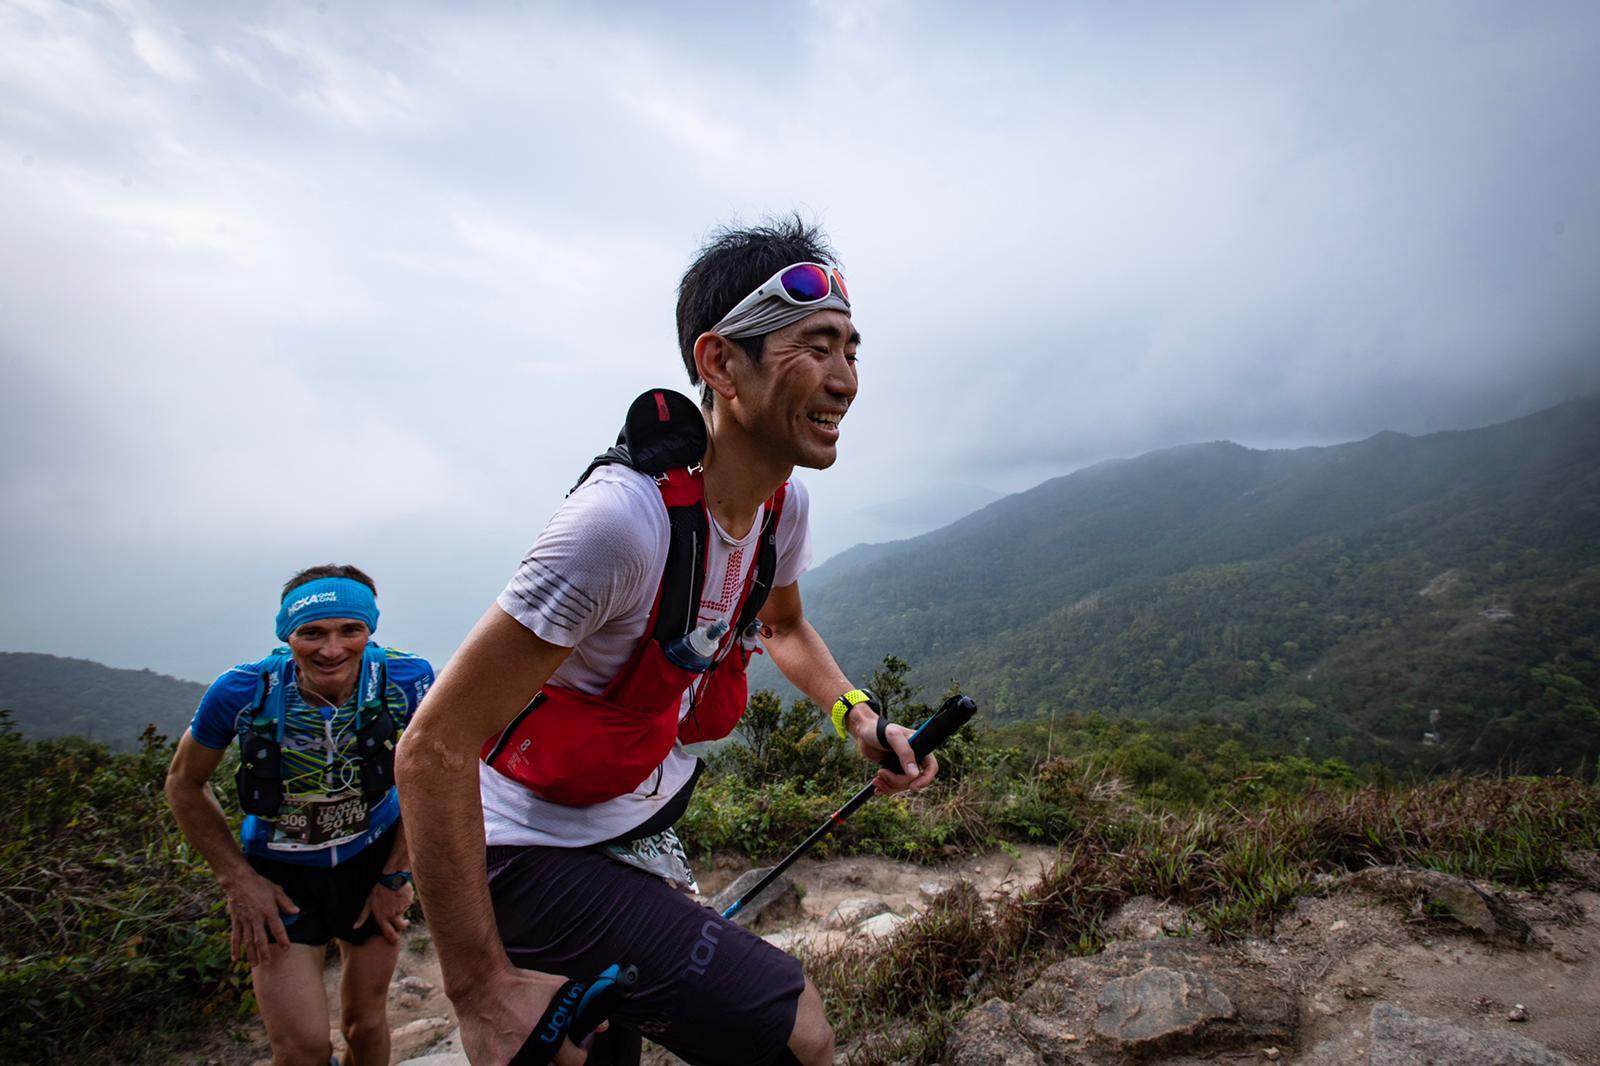 Athletes are arriving from overseas for the annual Lantau 50 Asian Skyrunning Championship. Photo: Handout